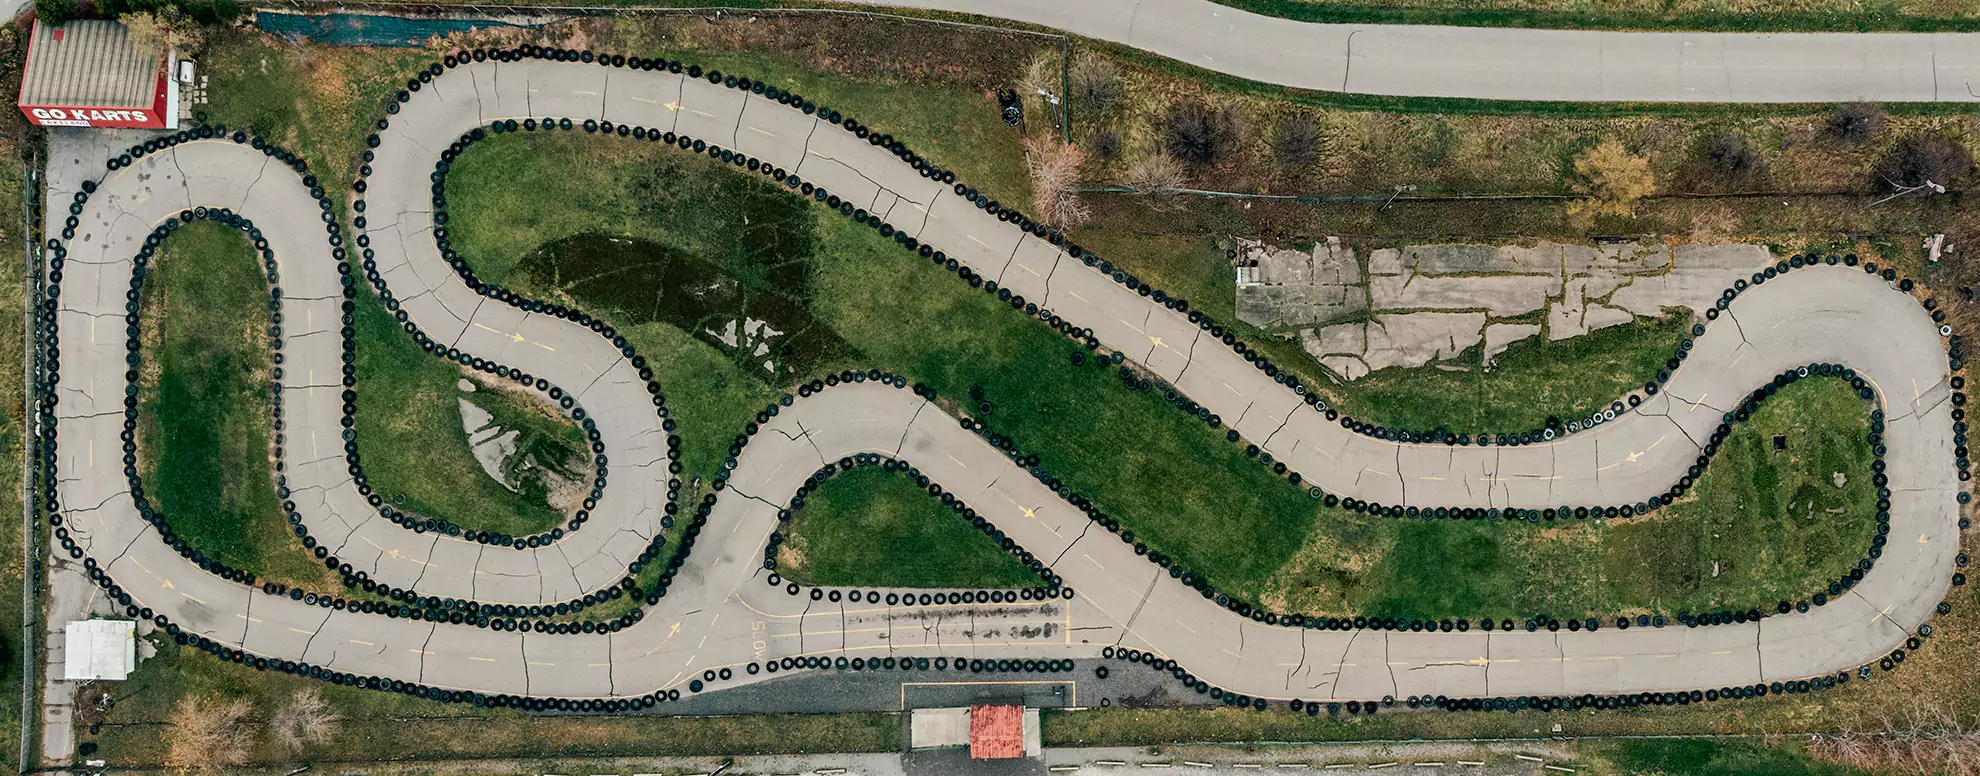 Aerial view of kart track.